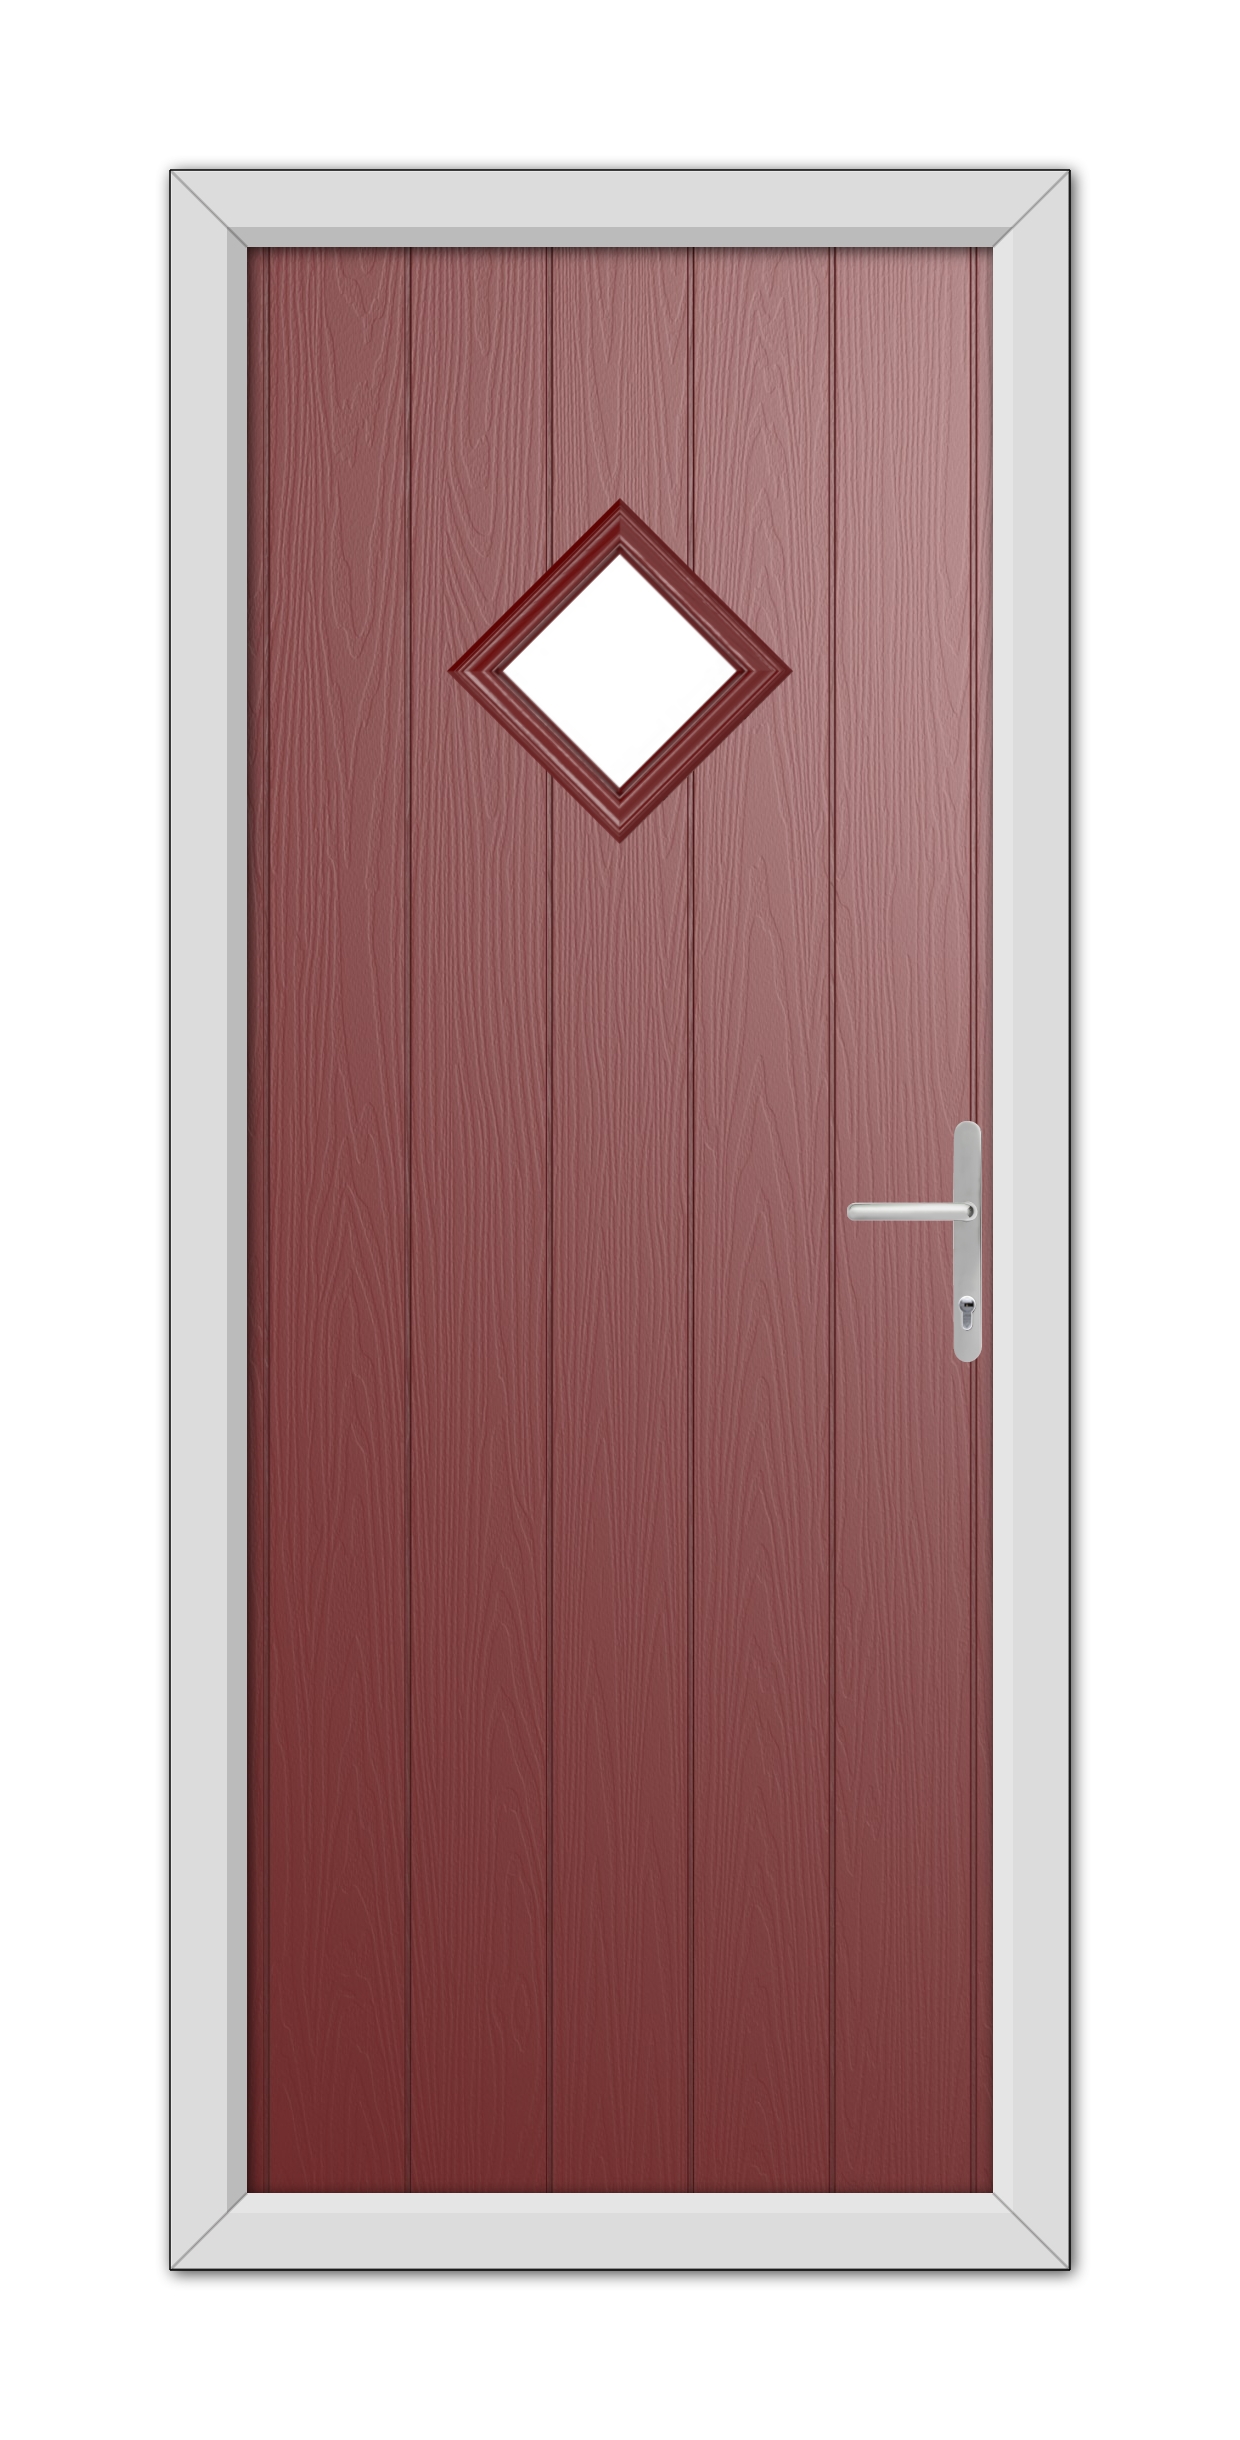 Red Cornwall Composite Door 48mm Timber Core with a diamond-shaped window and a modern handle, framed by a white doorframe.